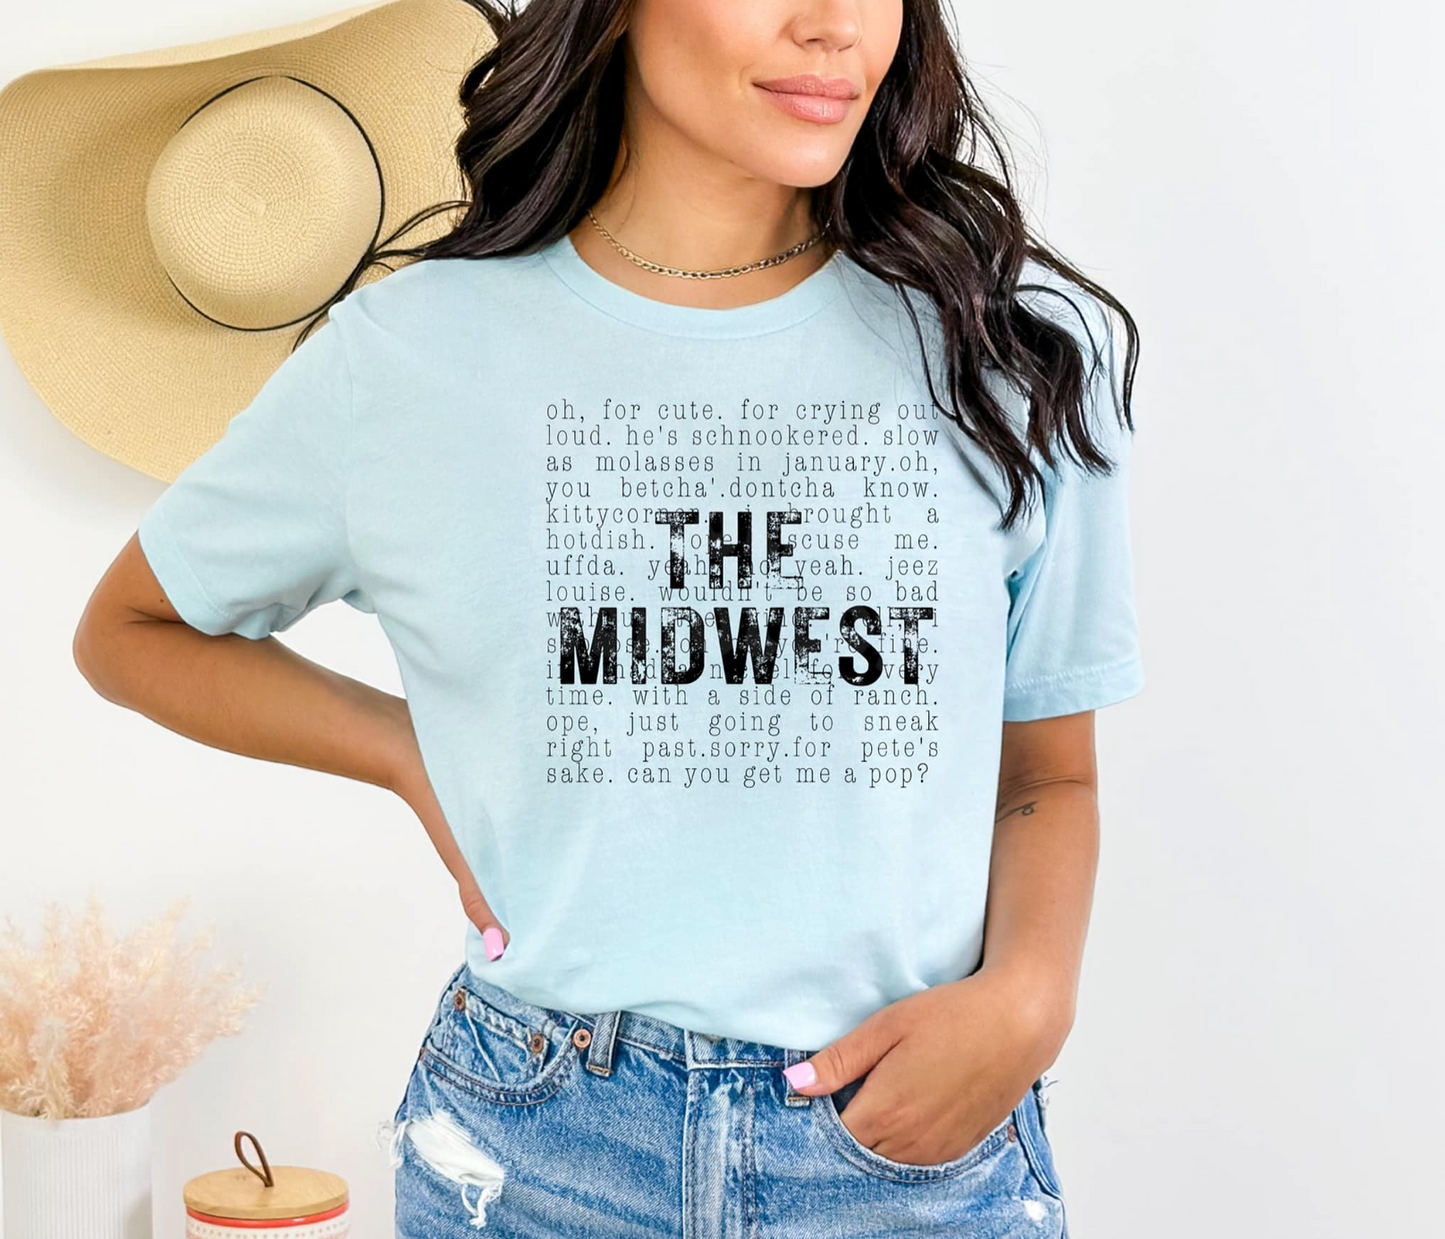 The Midwest